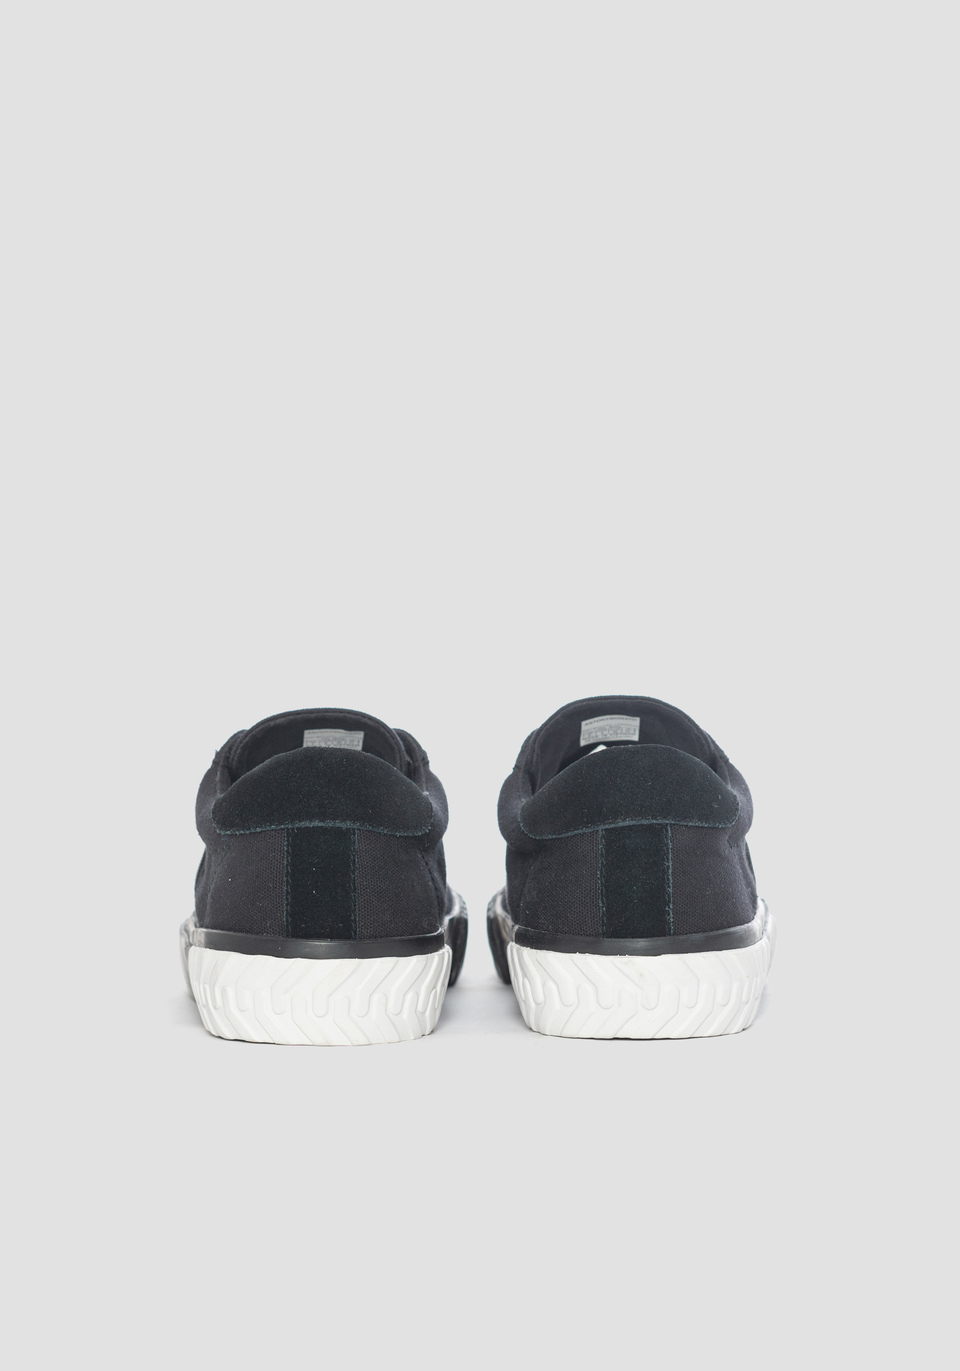 “BLADE” LOW-TOP SNEAKER IN COTTON CANVAS WITH TONAL SUEDED DETAILING - Antony Morato Online Shop